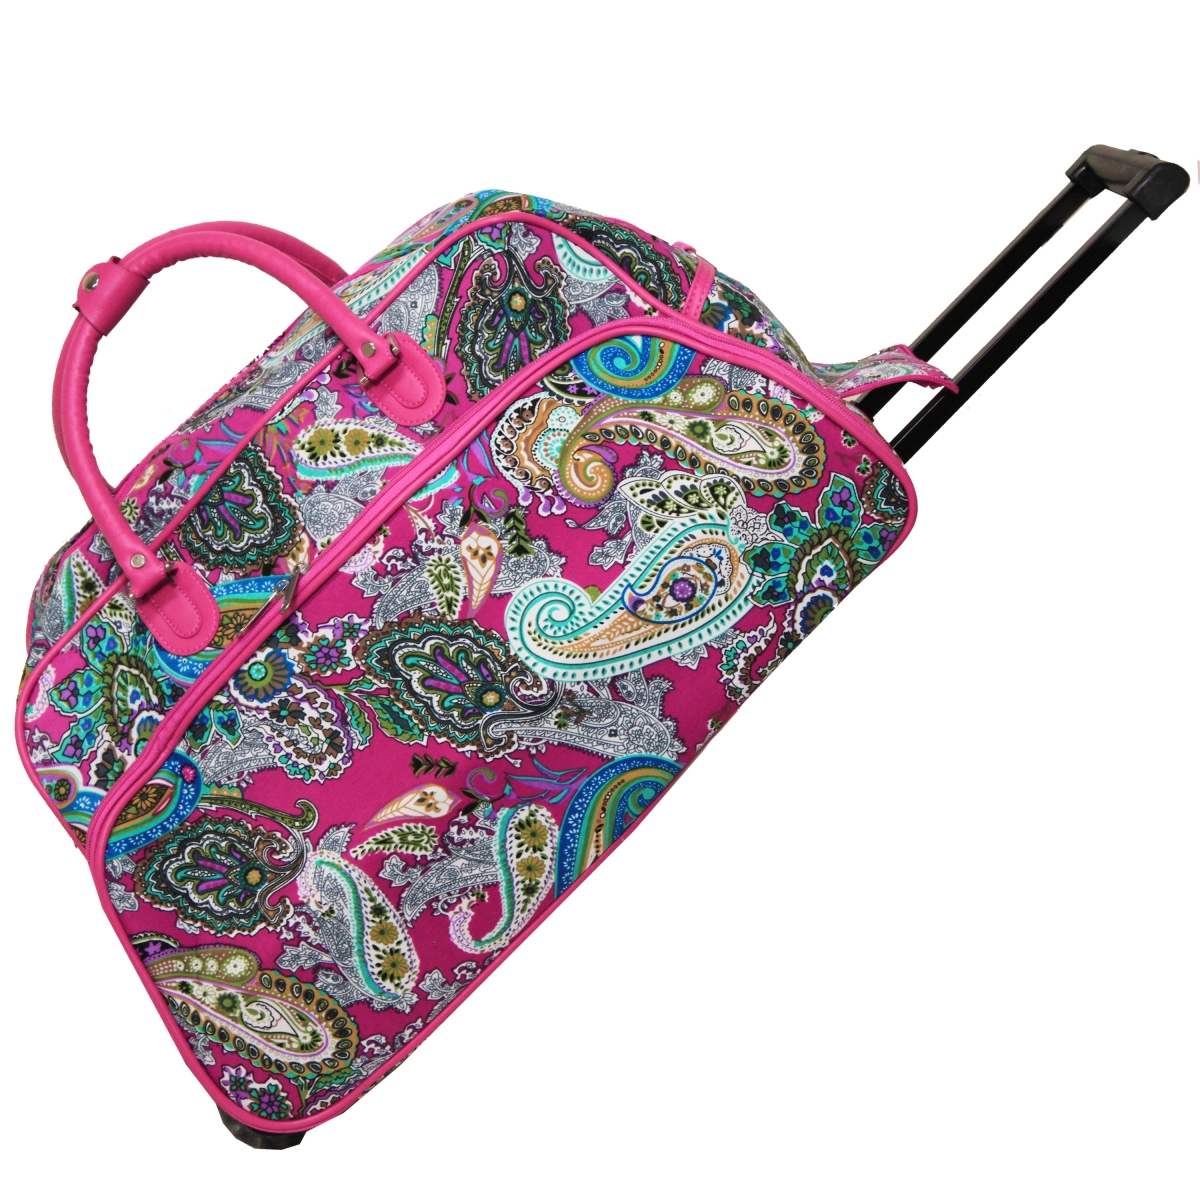 8112022-182 21 In. Carry On Rolling Duffel Bag - Pink Multicolor Paisley